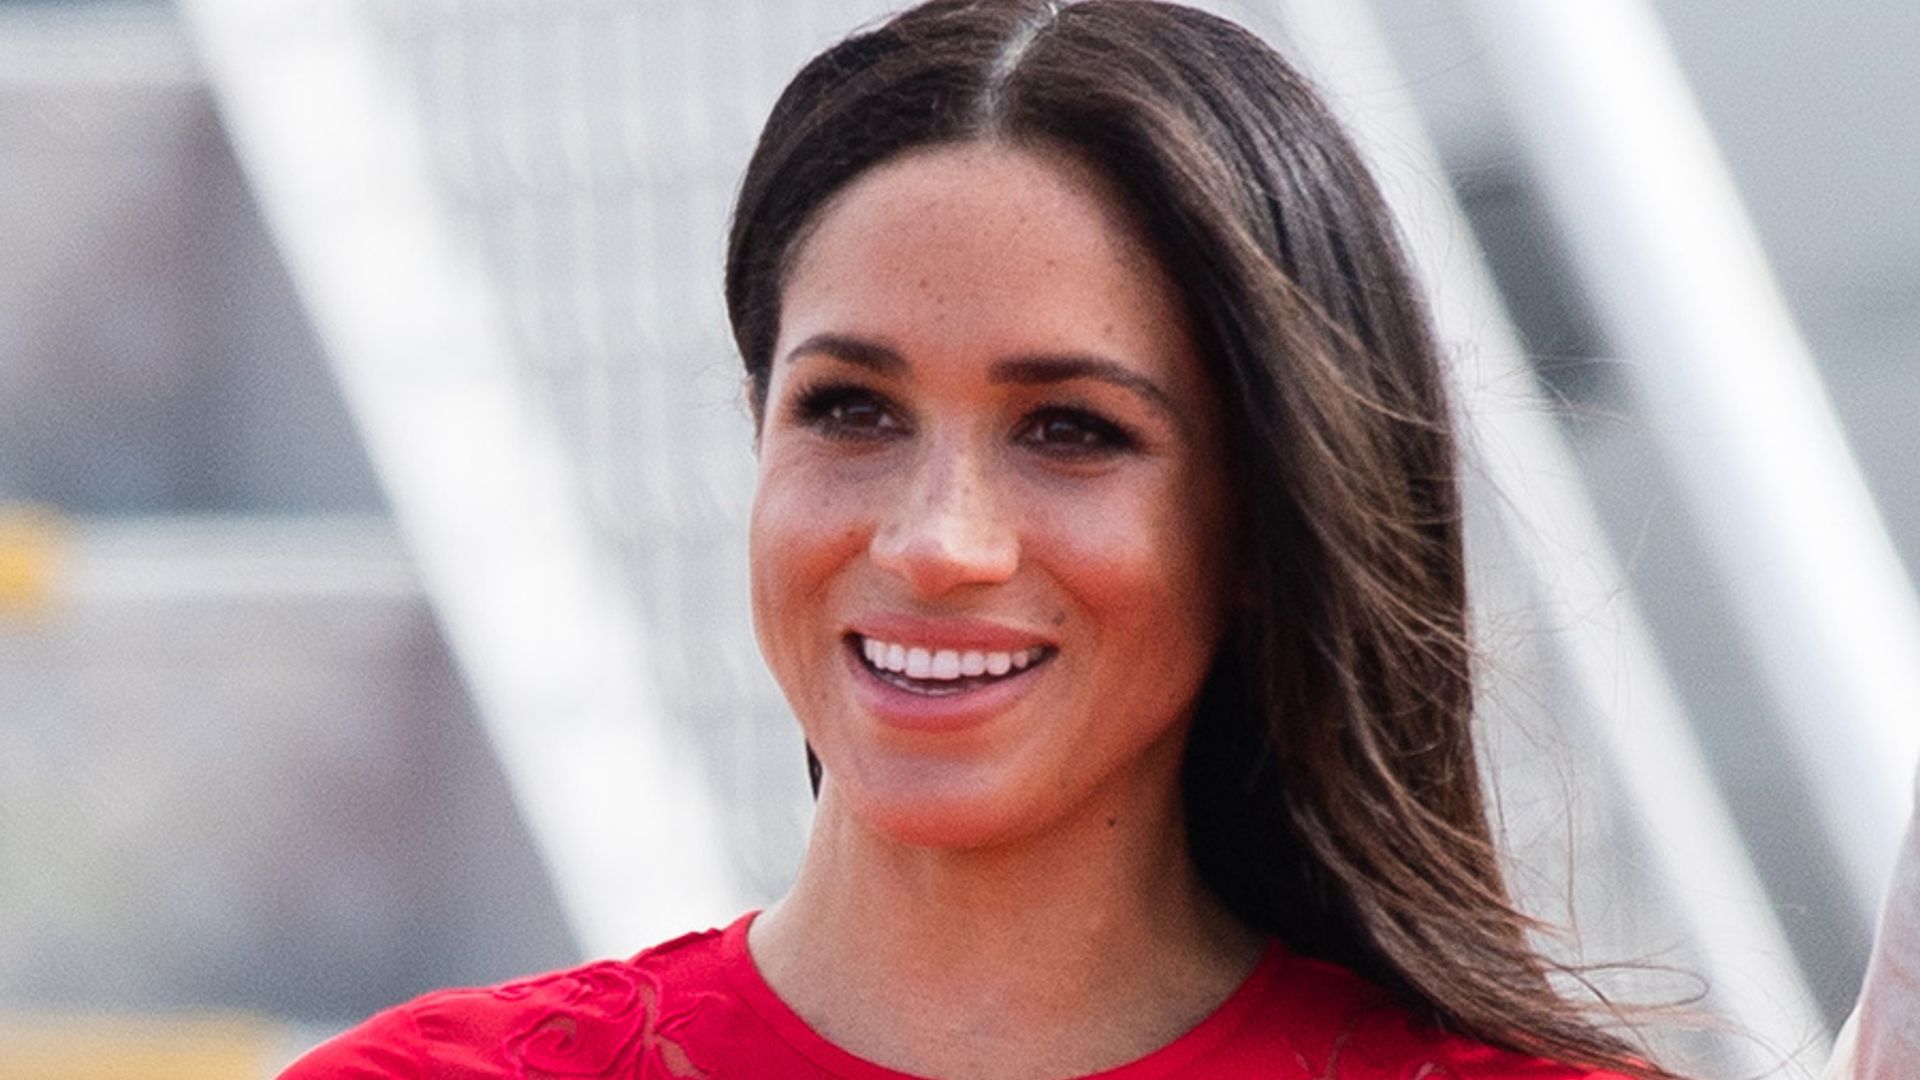 All the details of Duchess Meghan’s surprise trip to New York City